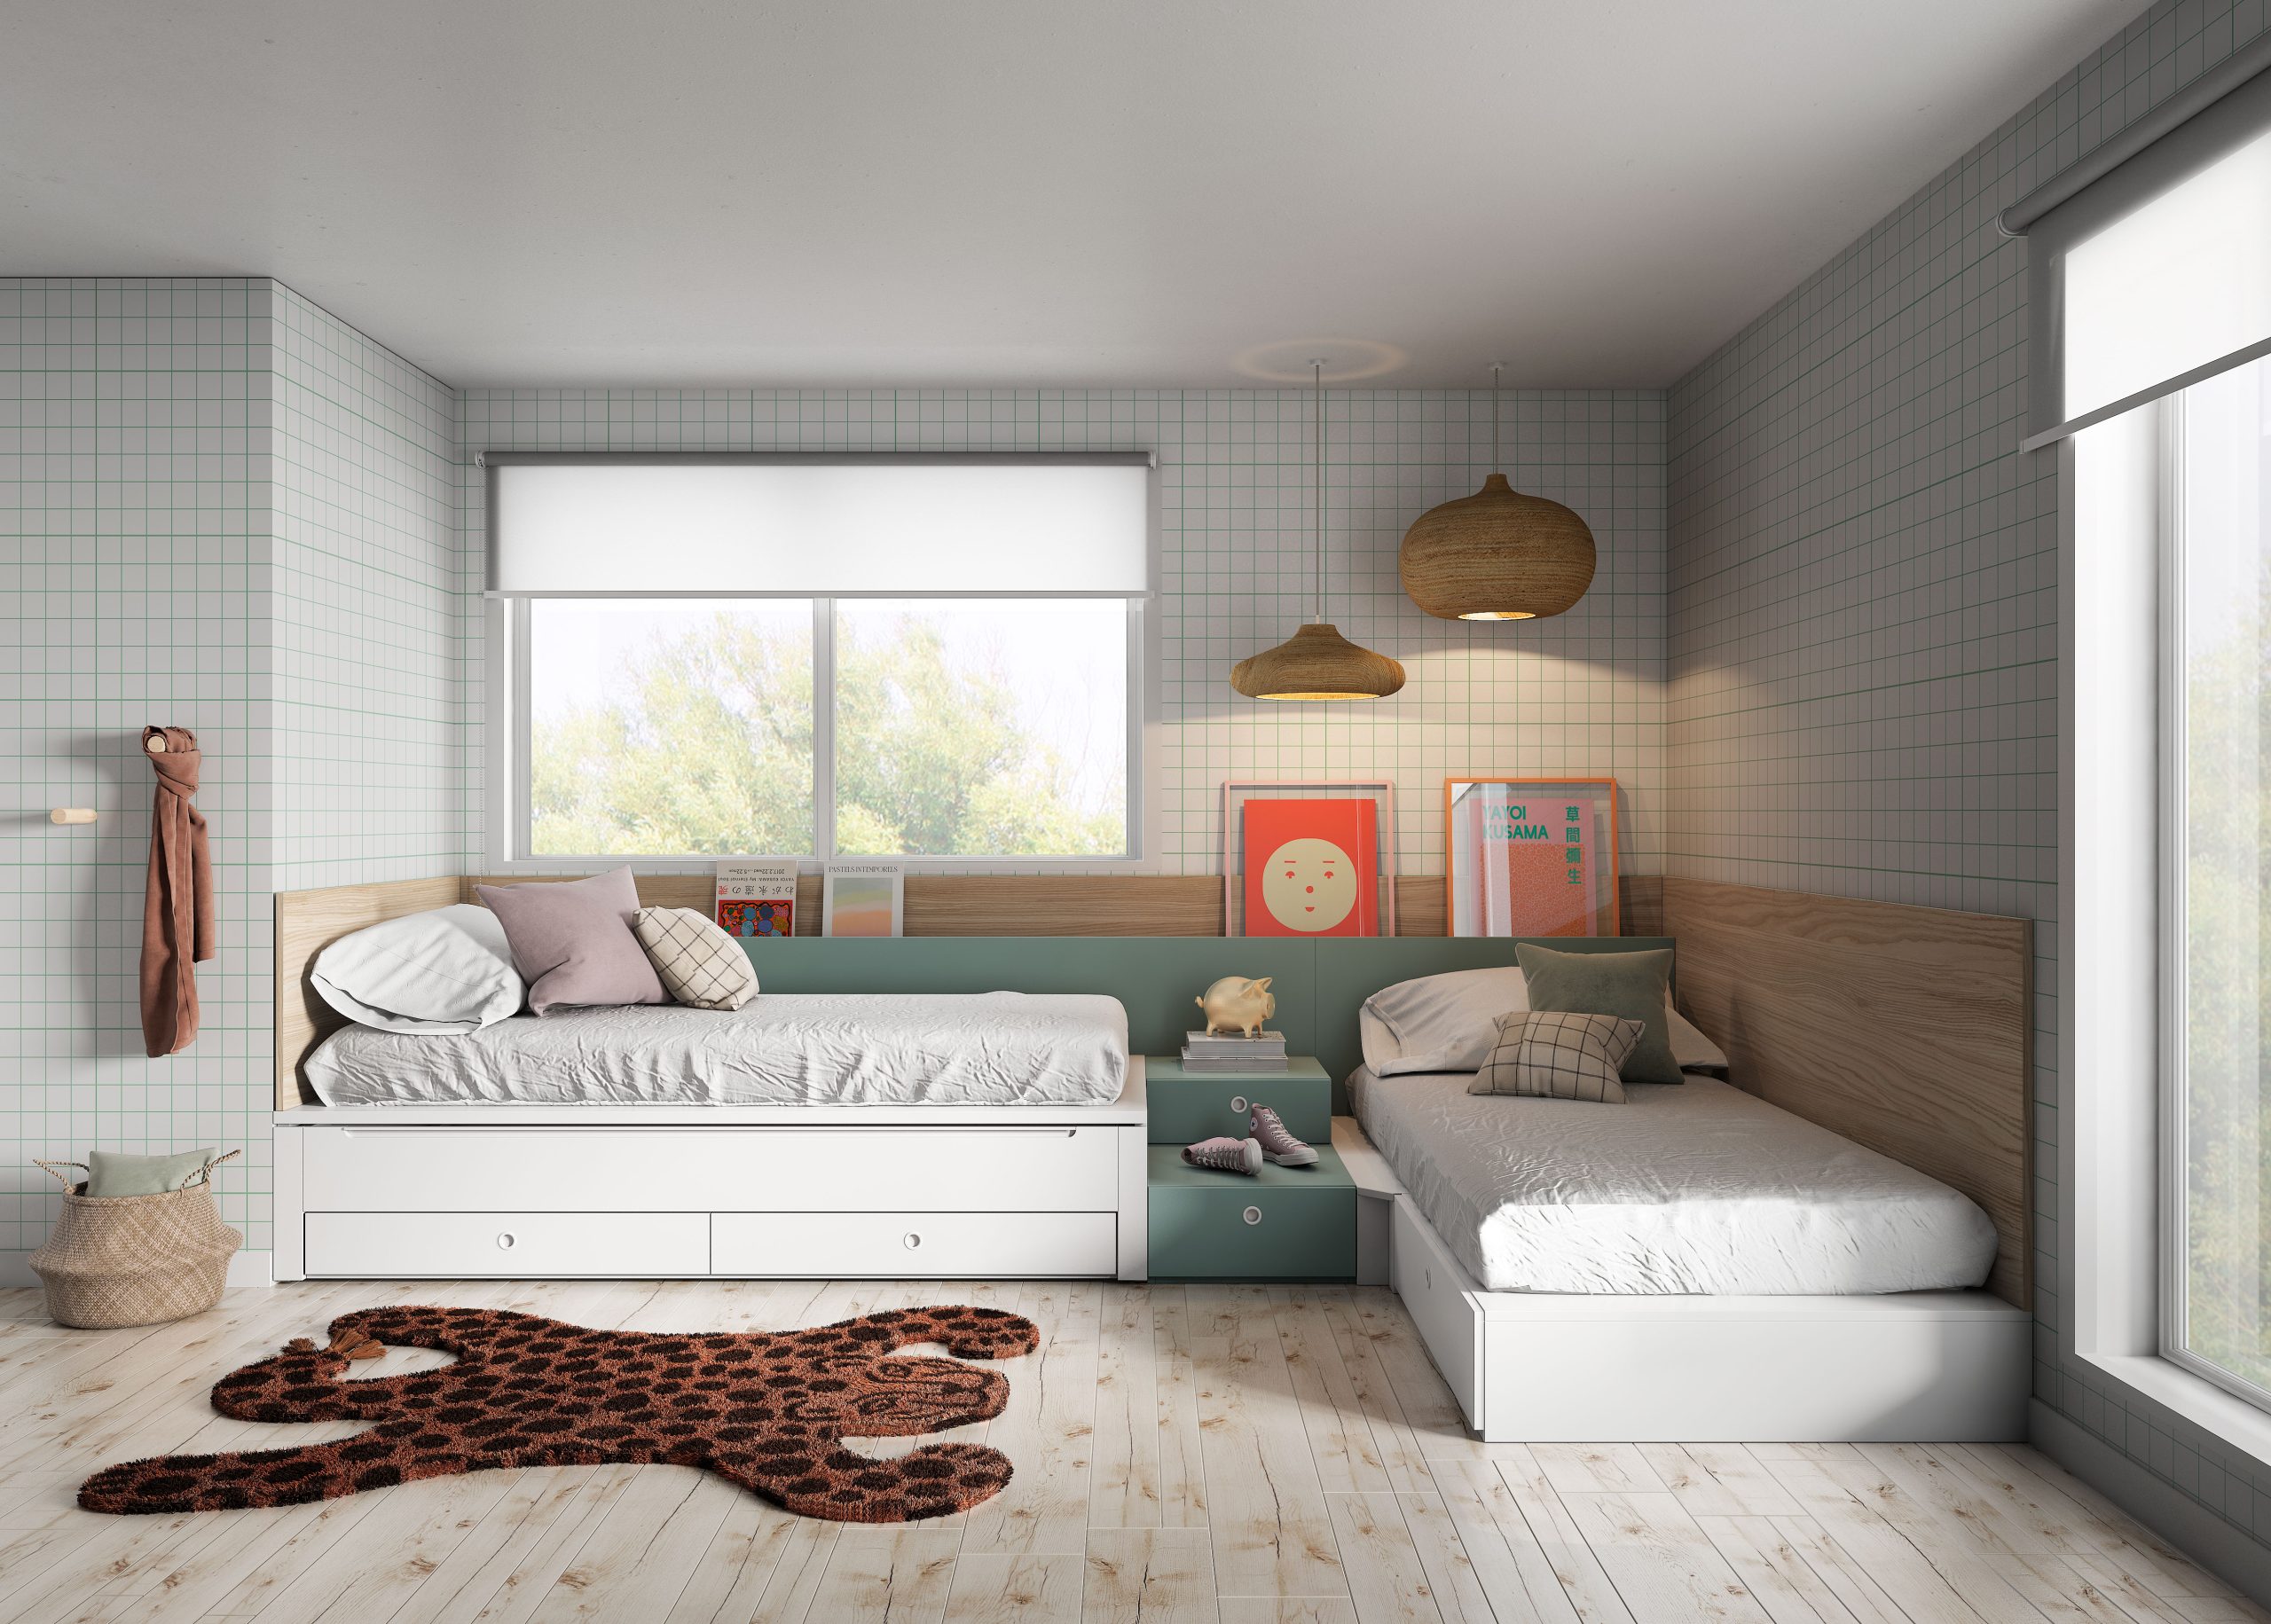 CHILDREN'S ROOM WITH TWO BEDS AND A SLIDING TRUNDLE BED